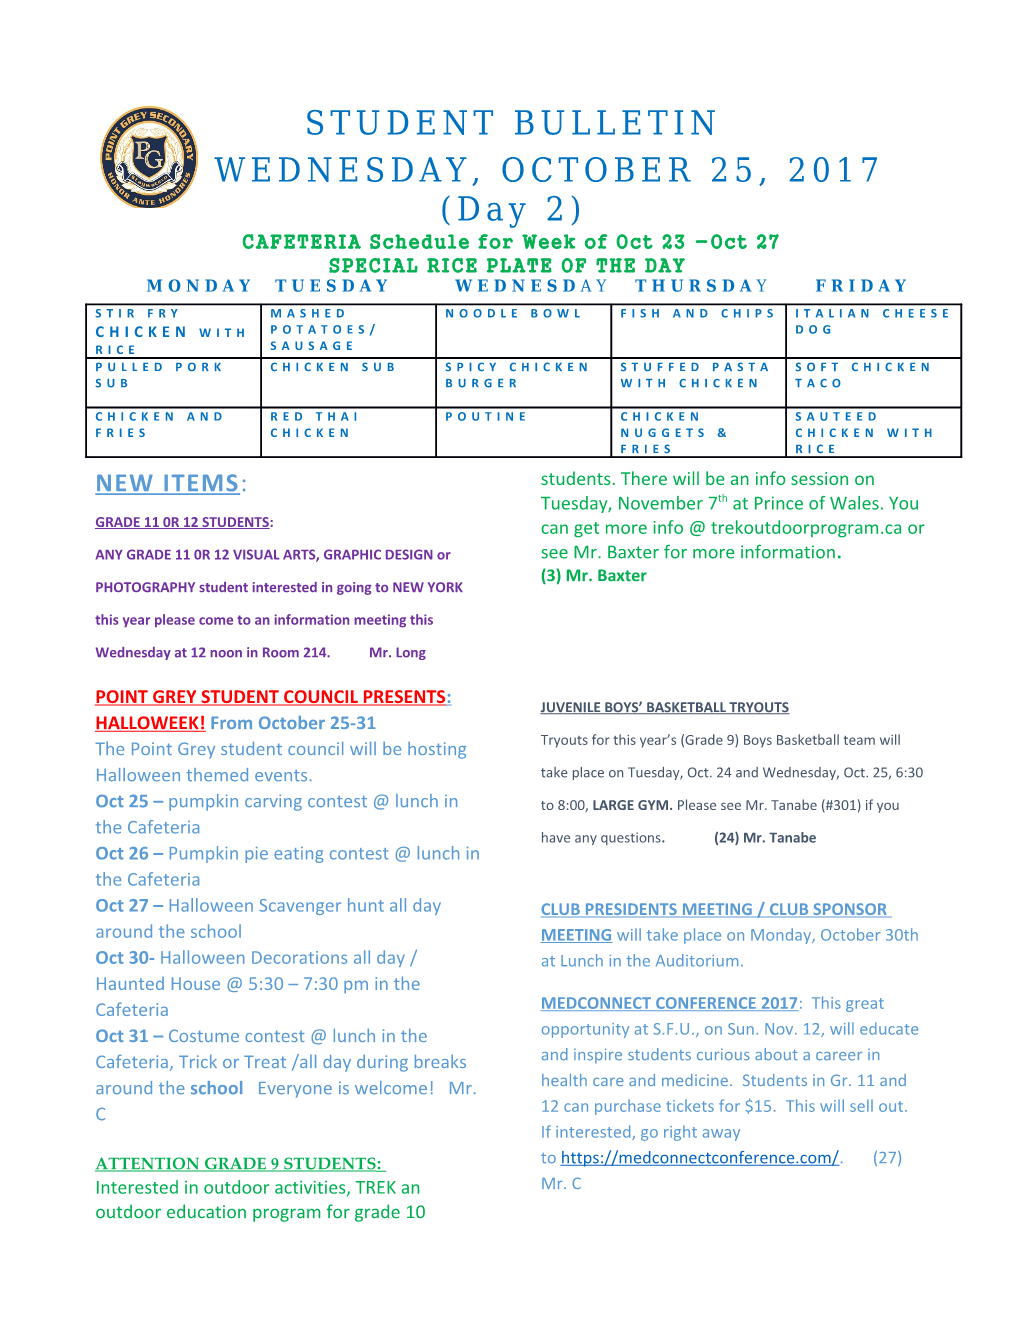 CAFETERIA Schedule for Week of Oct 23 -Oct 27